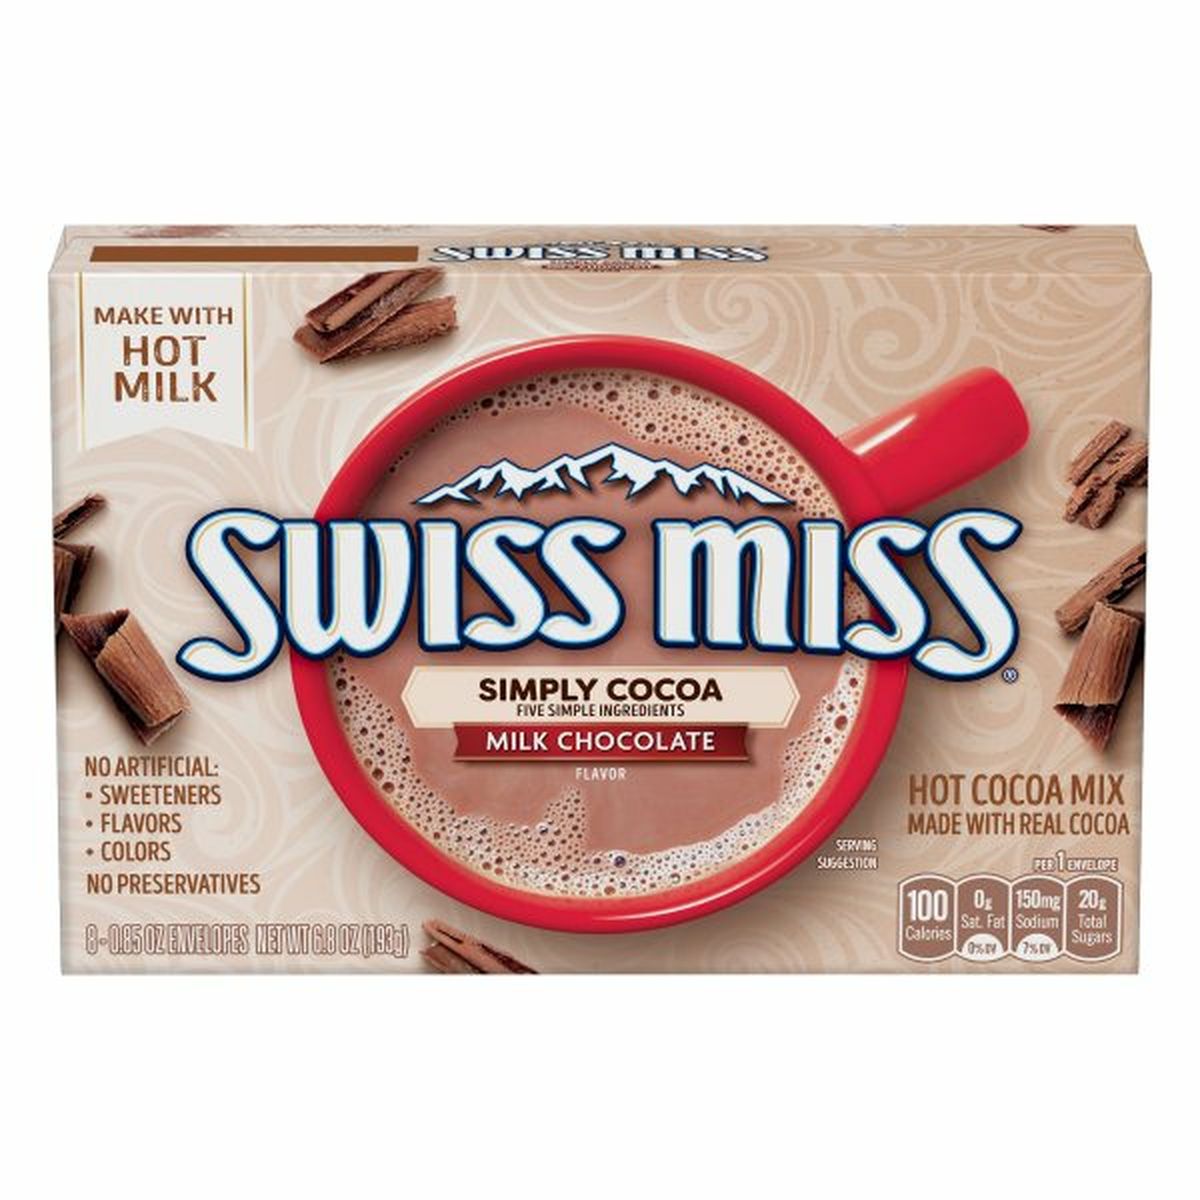 Calories in Swiss Miss Simply Cocoa Hot Cocoa Mix, Milk Chocolate Flavor